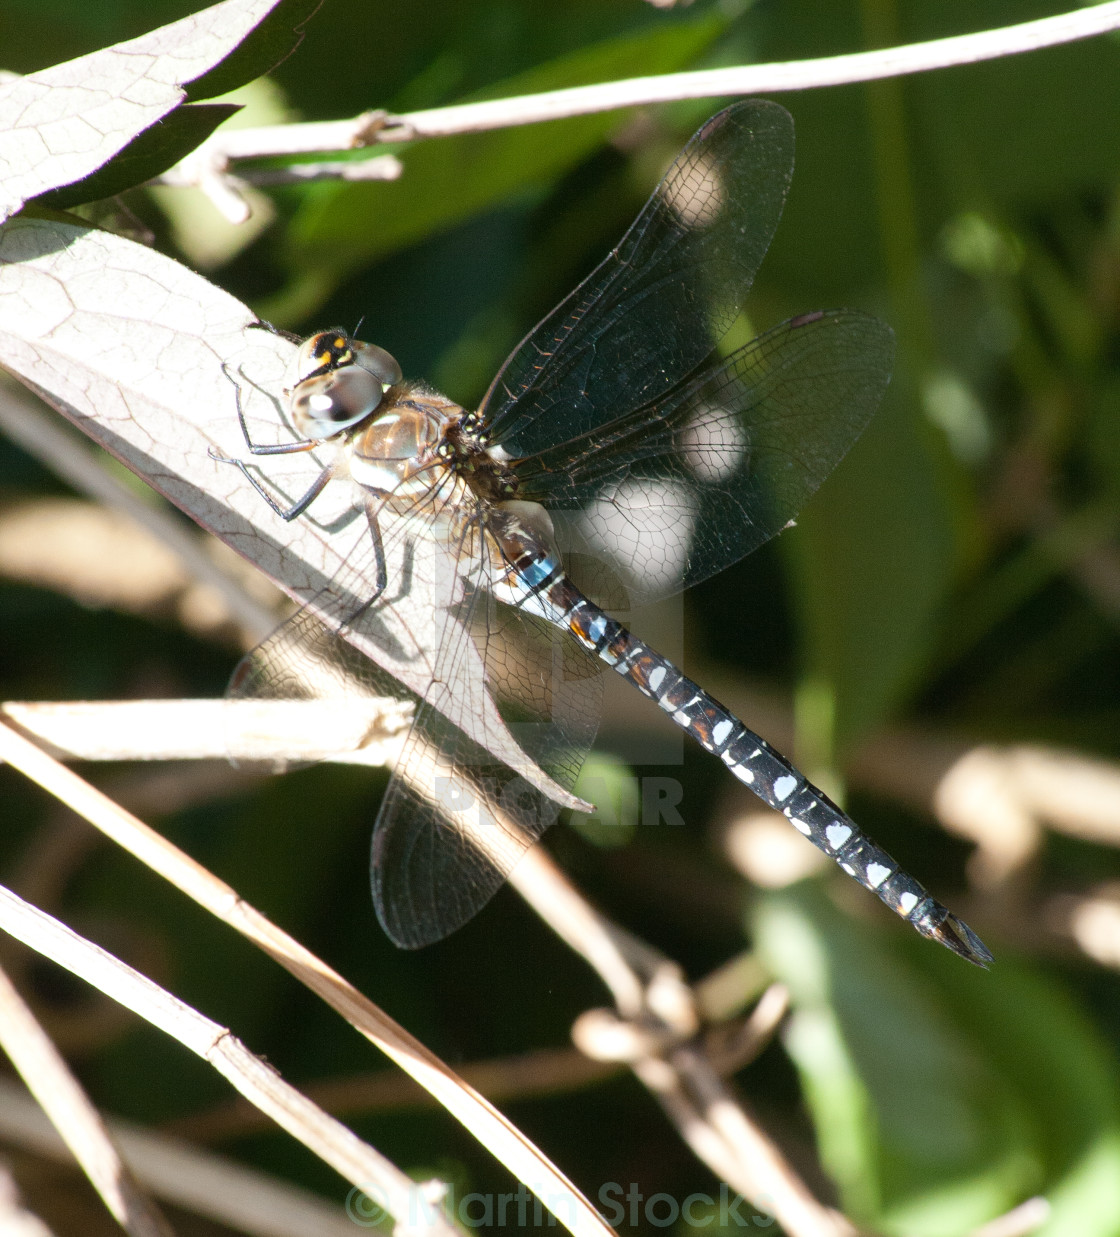 "Dragonfly at rest" stock image